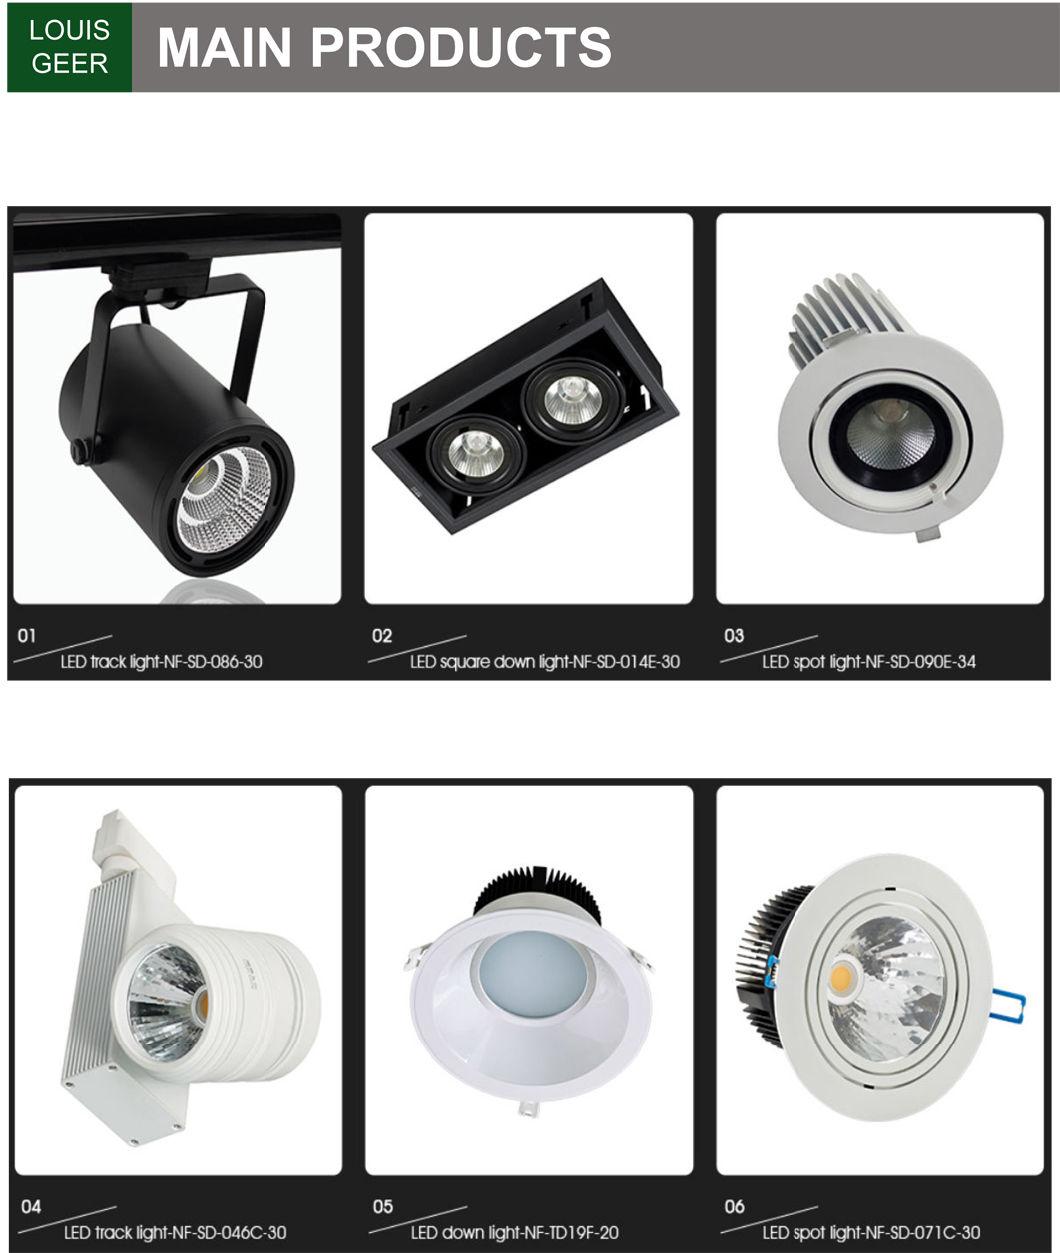 High Performance Wholesale Aluminum PC Housing IP20 Small 3W Round LED Spot Lights